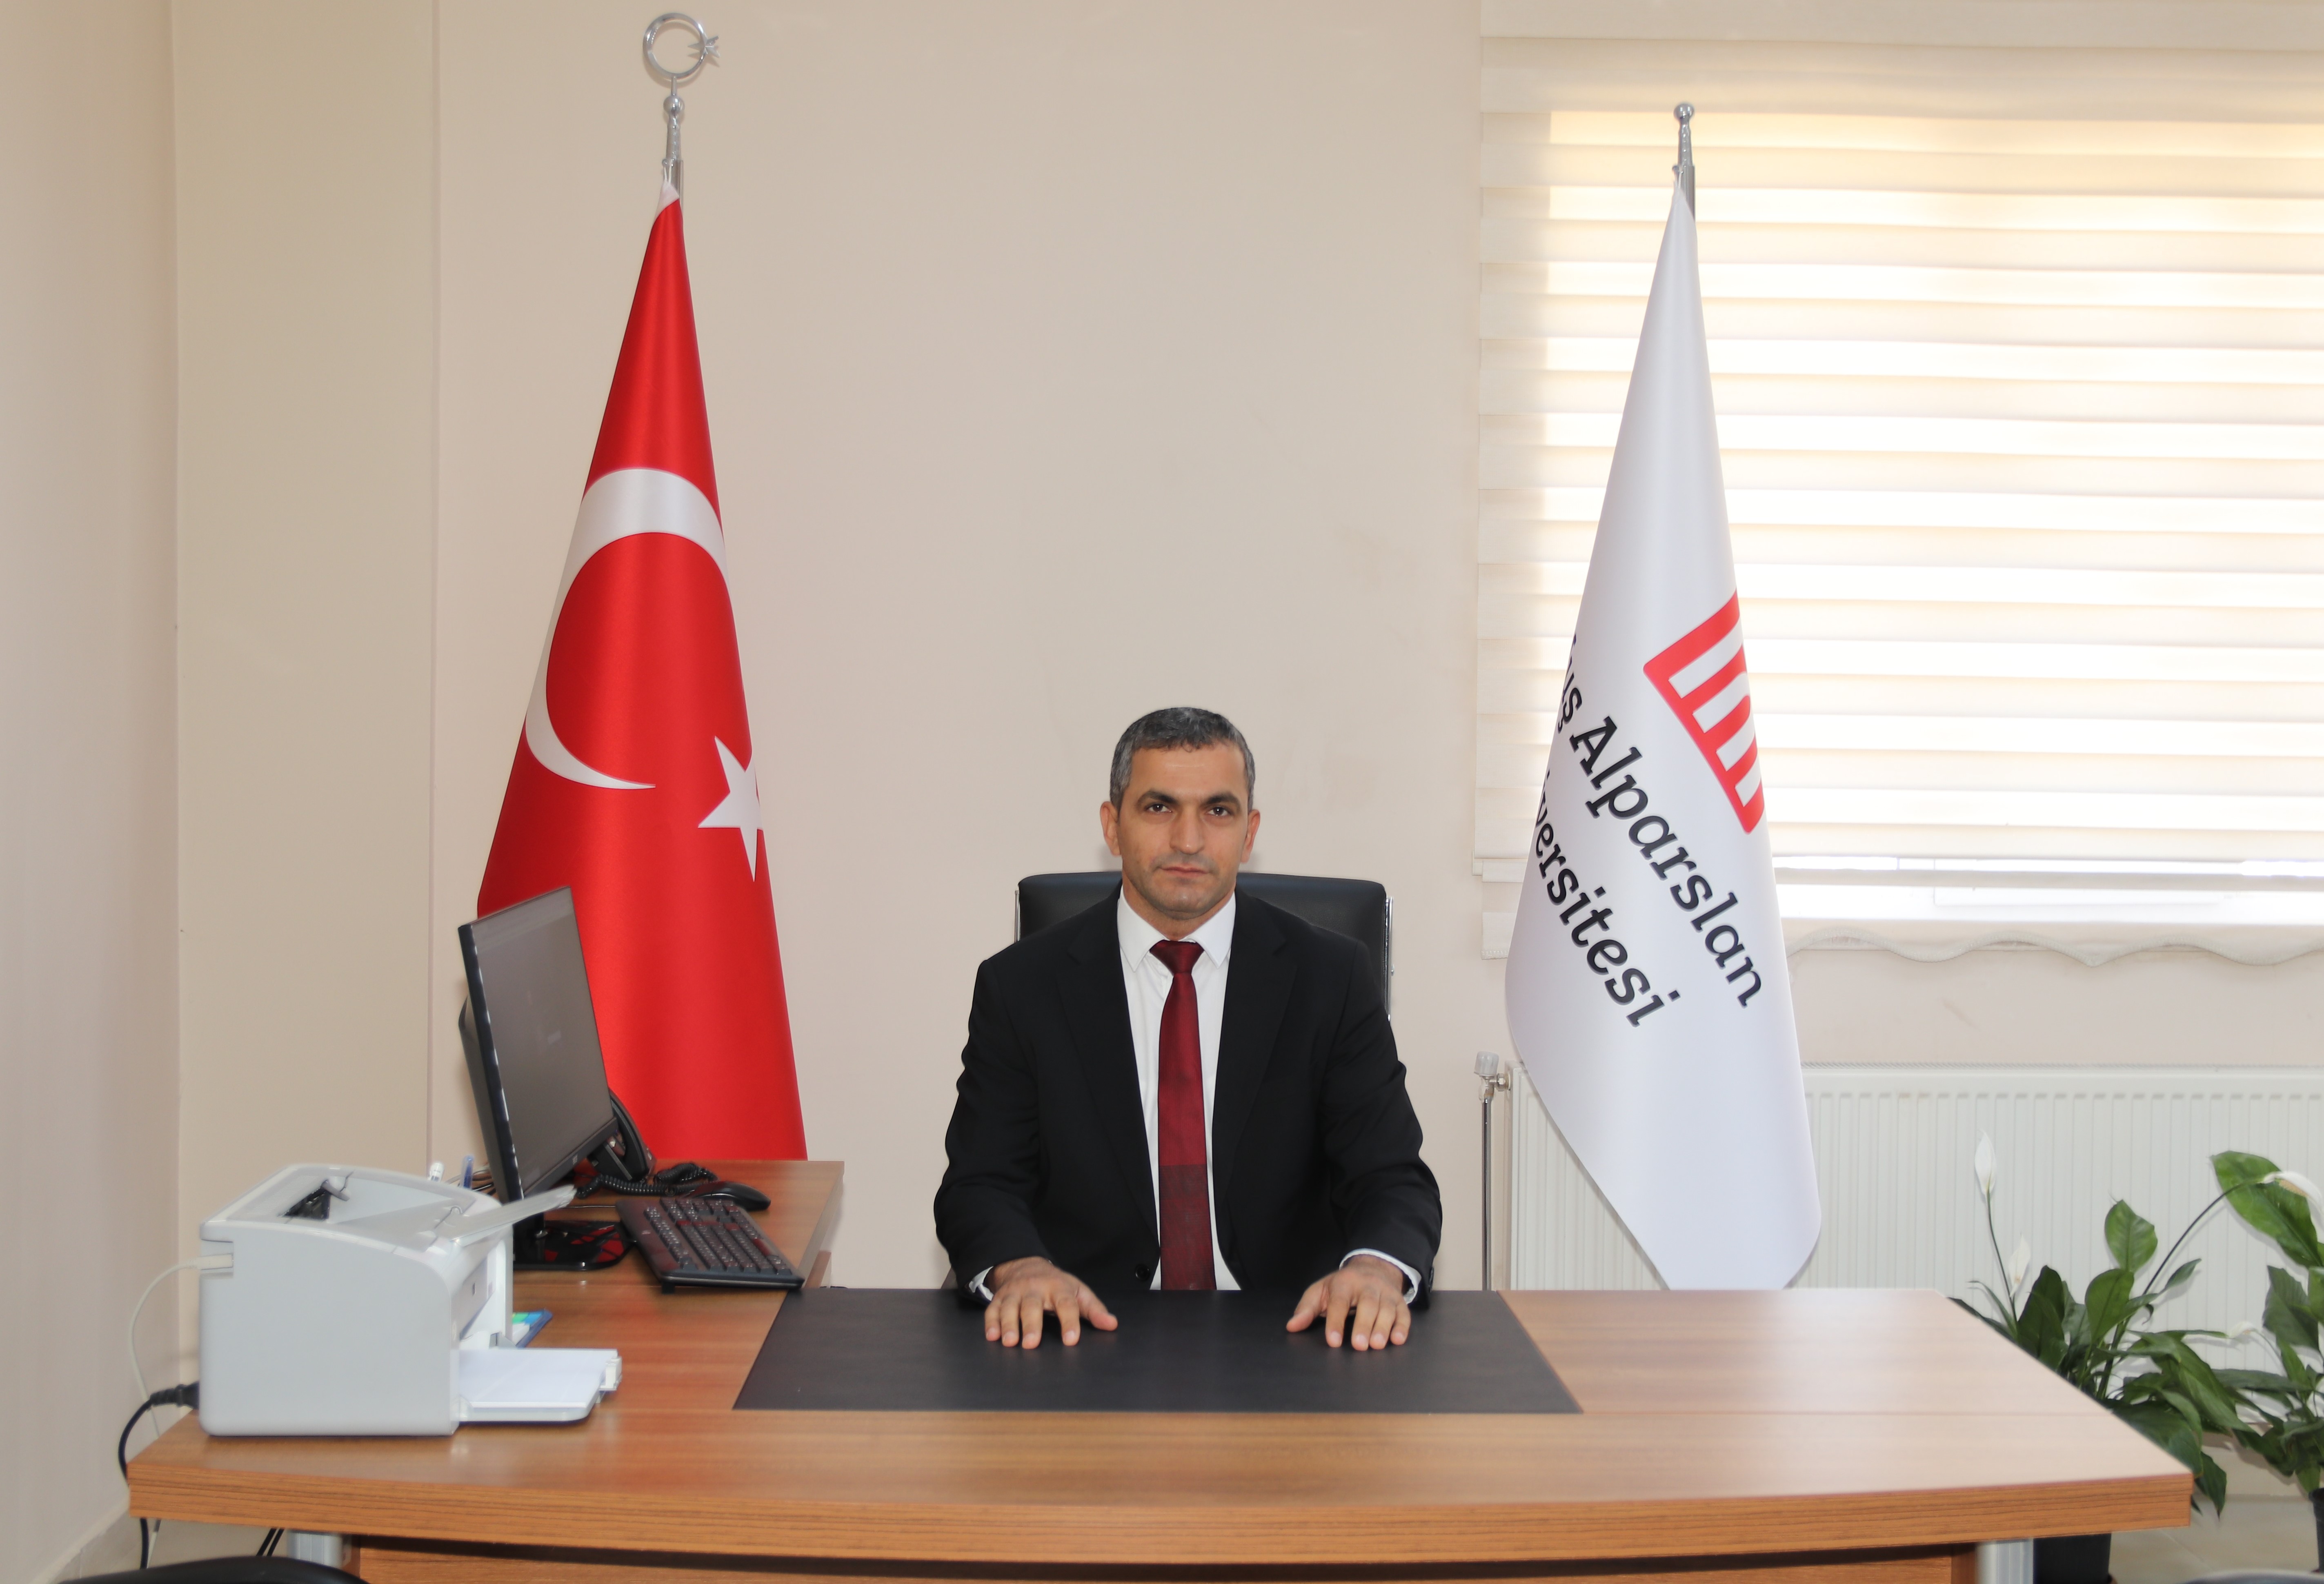 Assoc. Prof. Dr. Selçuk SAĞIR was born in 1983 in Palu district of Elaziğ. He completed his primary, secondary and high school education in Kovancılar. In 2001, he started his undergraduate education at Fırat University, Faculty of Arts and Sciences, Department of Physics and graduated in 2005. He completed his master's degree in Physics Department of the Institute of Science and Technology of the same university in 2008. In 2009, he started to work as a research assistant at Muş Alparslan University, Faculty of Arts and Sciences, Department of Physics. In 2013, he completed his doctorate in Fırat University Institute of Science and Technology, Department of Physics, High Energy and Plasma Physics. In 2013, he received the title of Assistant Professor and in 2018 he received the title of Associate Professor. Nearly 100 national and international scientific studies have been cited more than 300 times. He has worked as an Executive and Researcher in projects within the scope of international cooperation. Prof. Dr. Sağır has held many administrative positions such as Head of Department, Head of Department, Vice Director of Vocational School, Vocational School Board Member, Vocational School Board Member, Vice Dean, Senate Member. He is currently serving as the Director of the Institute of Natural and Applied Sciences and speaks English at intermediate level. Dr. Sağır is married and has three children.